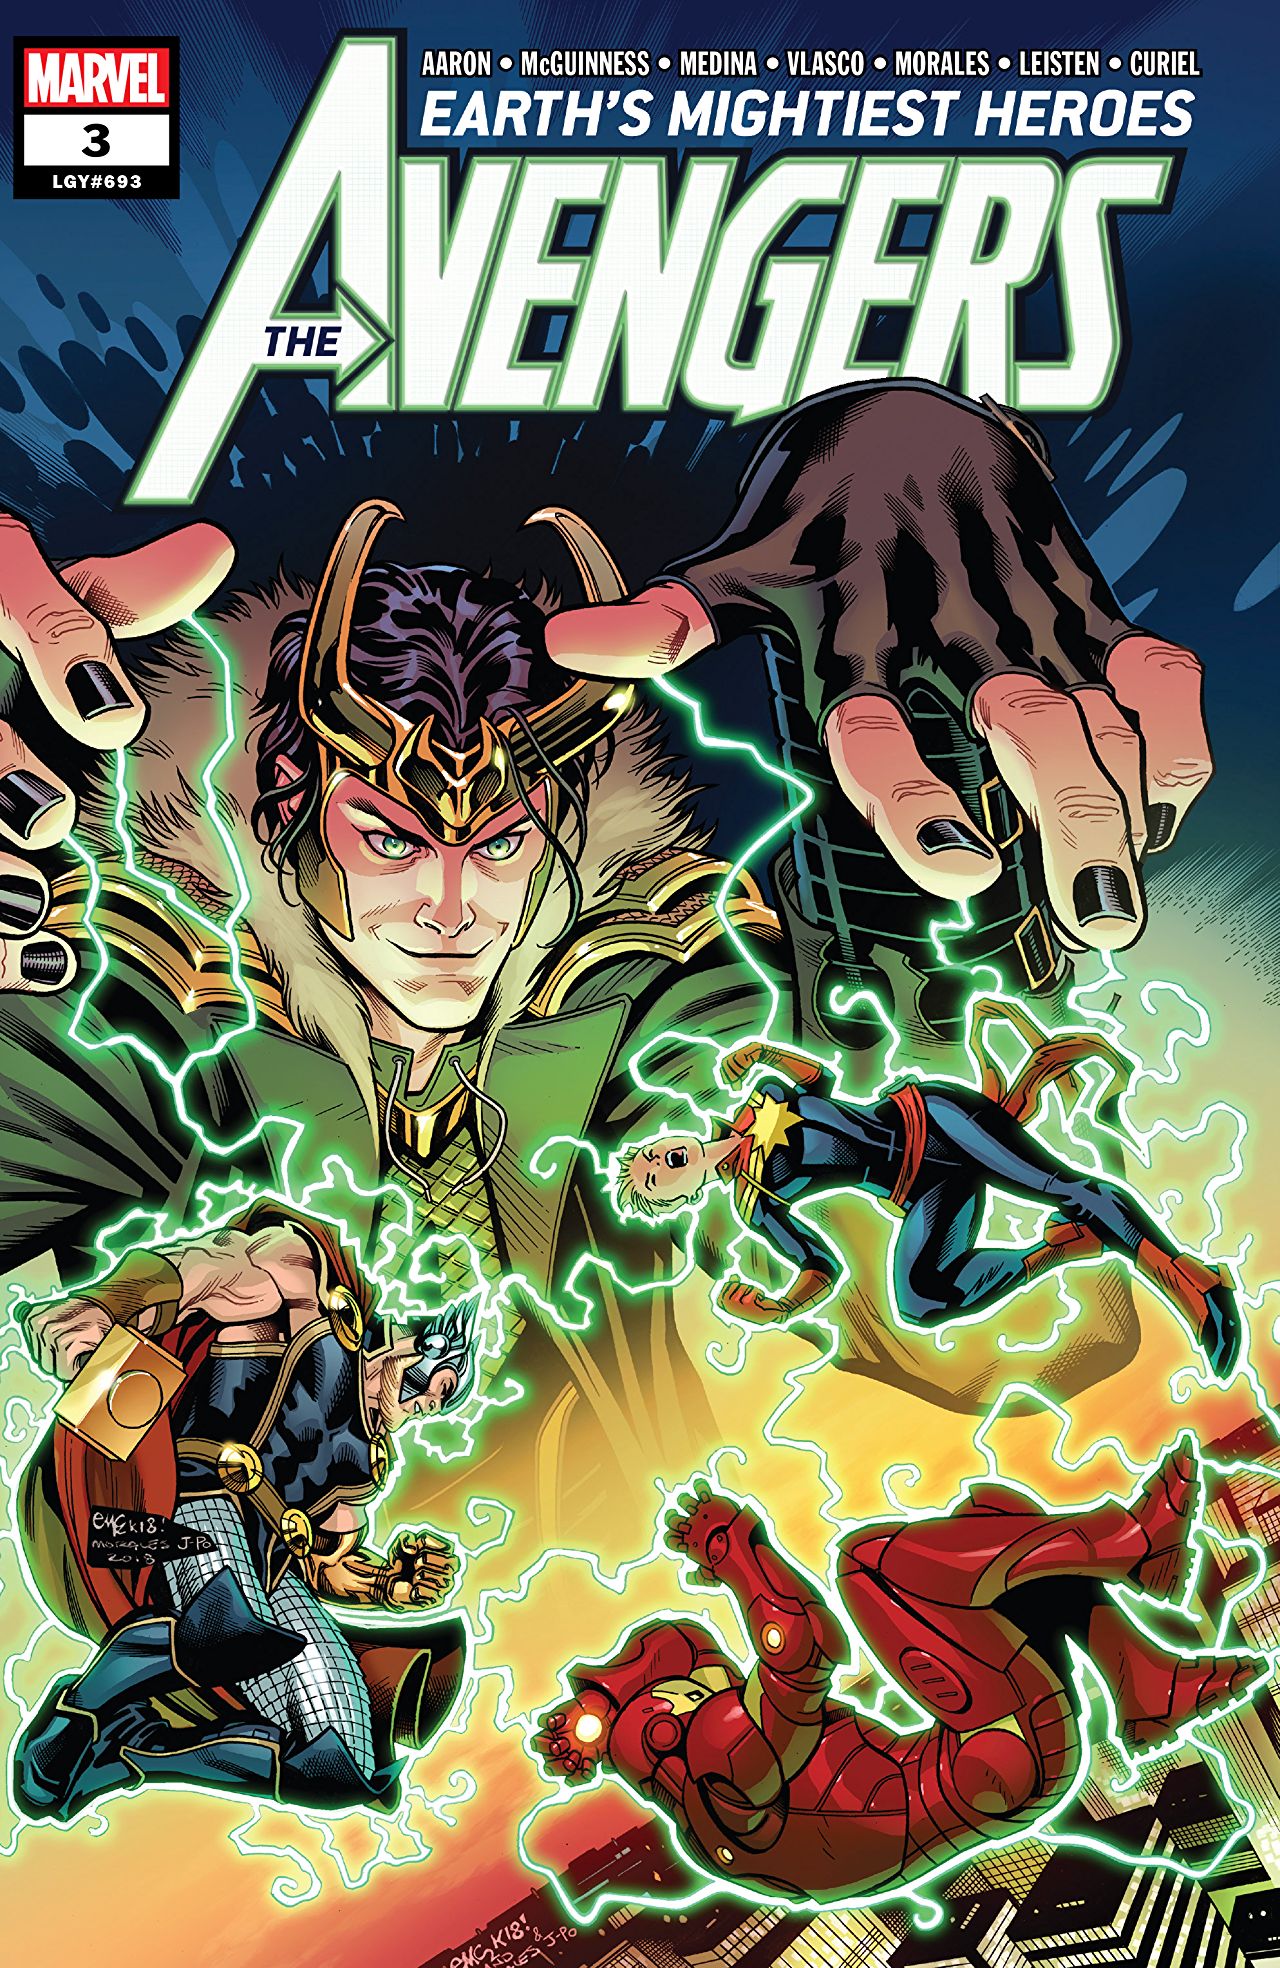 Avengers #3 Where Space Gods Go To Die Comic Book Review